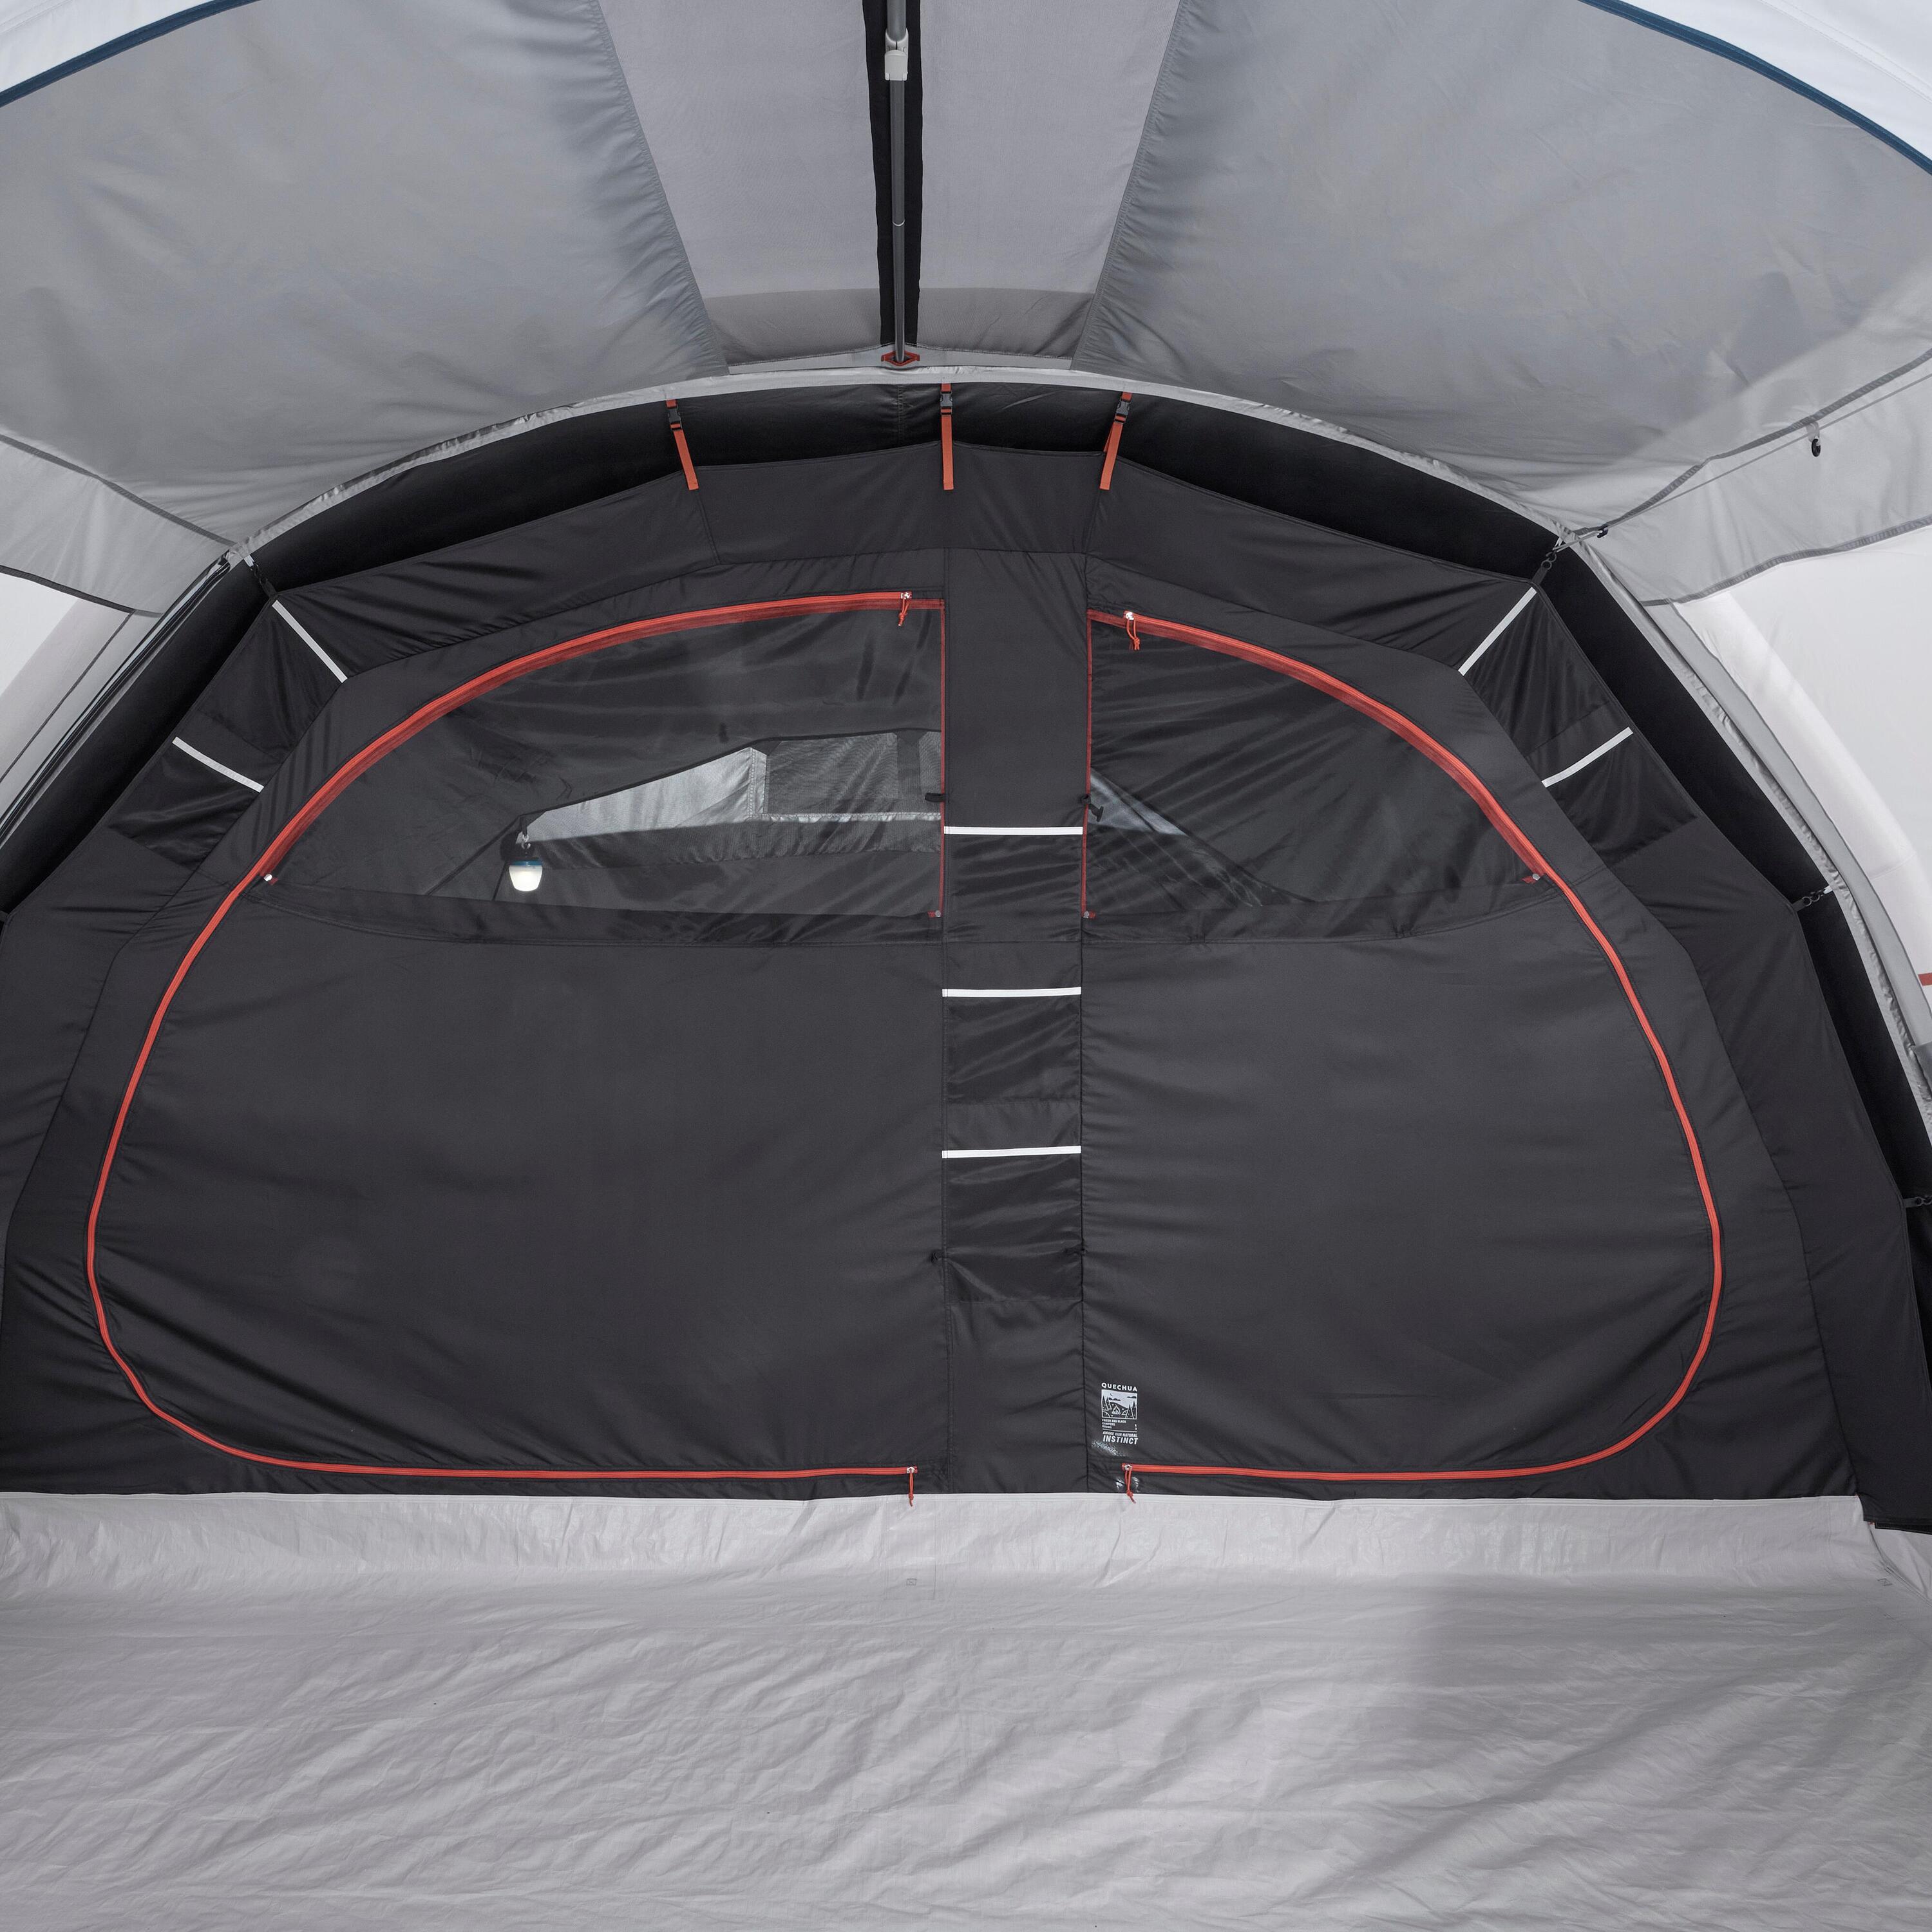 BEDROOM - REPLACEMENT PART FOR THE AIR SECONDS 5.2 FRESH&BLACK TENT 2/2